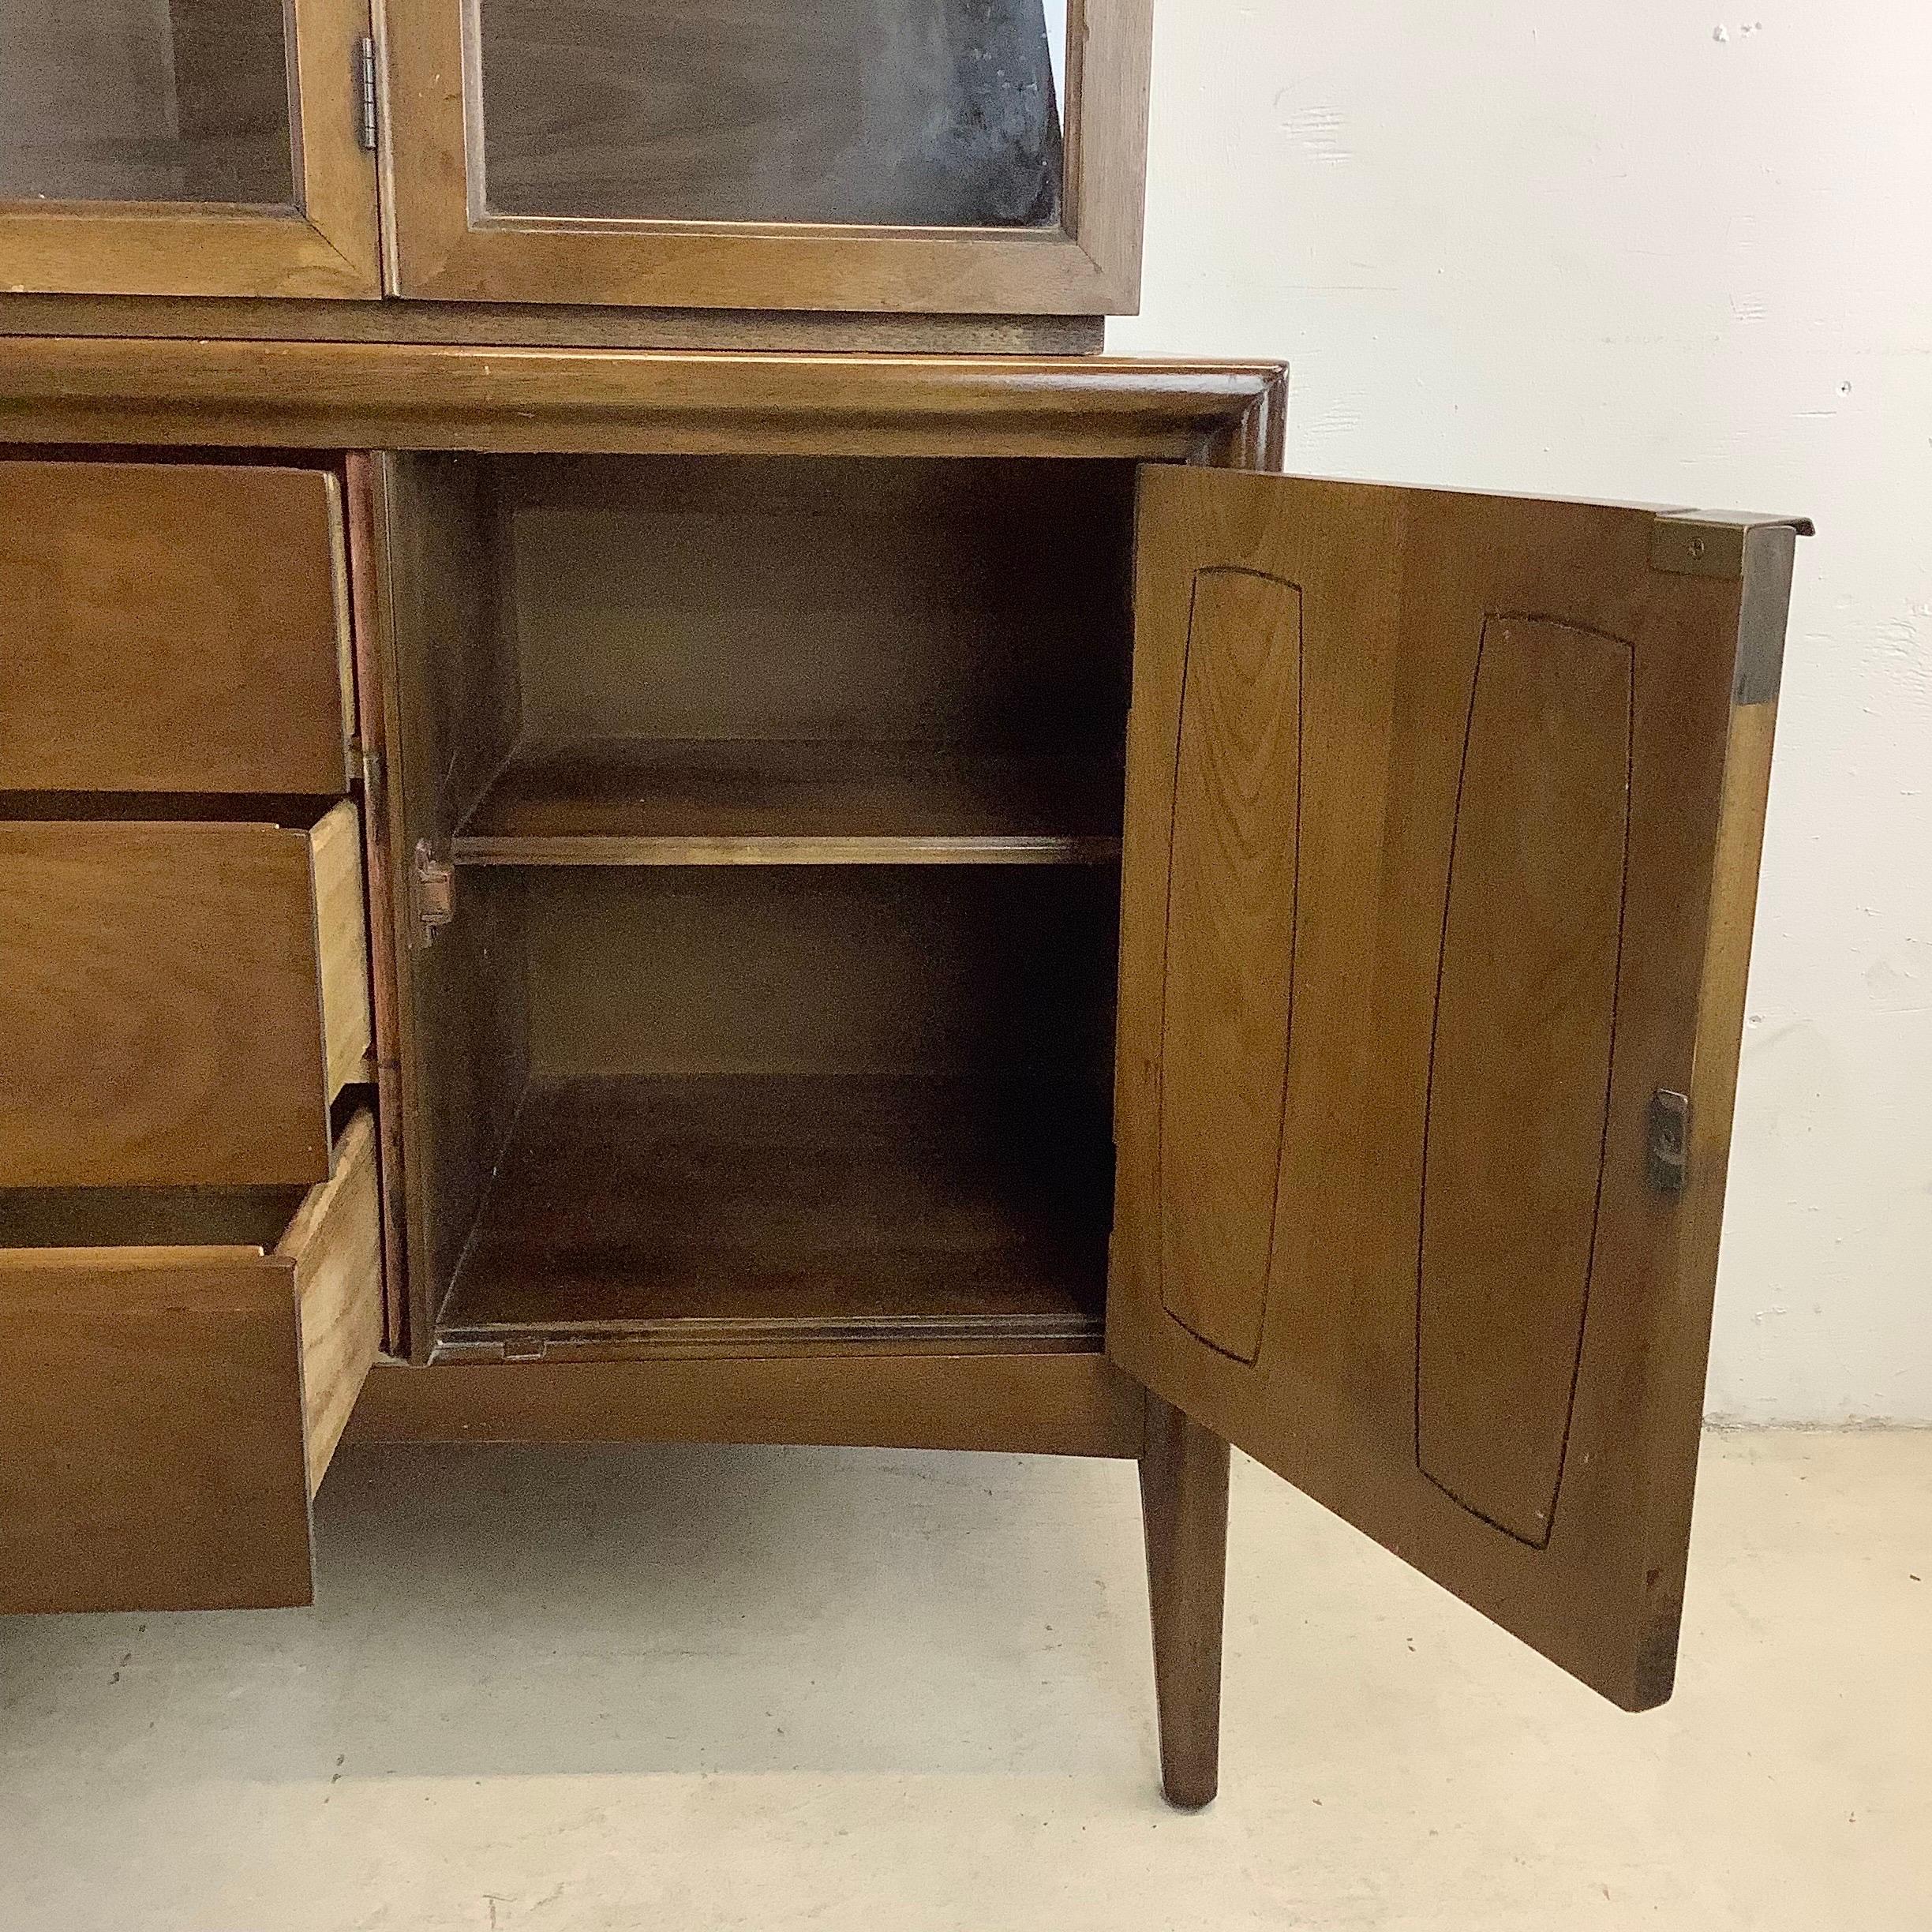 20th Century Midcentury Walnut Broyhill Sideboard with Display Cabinet